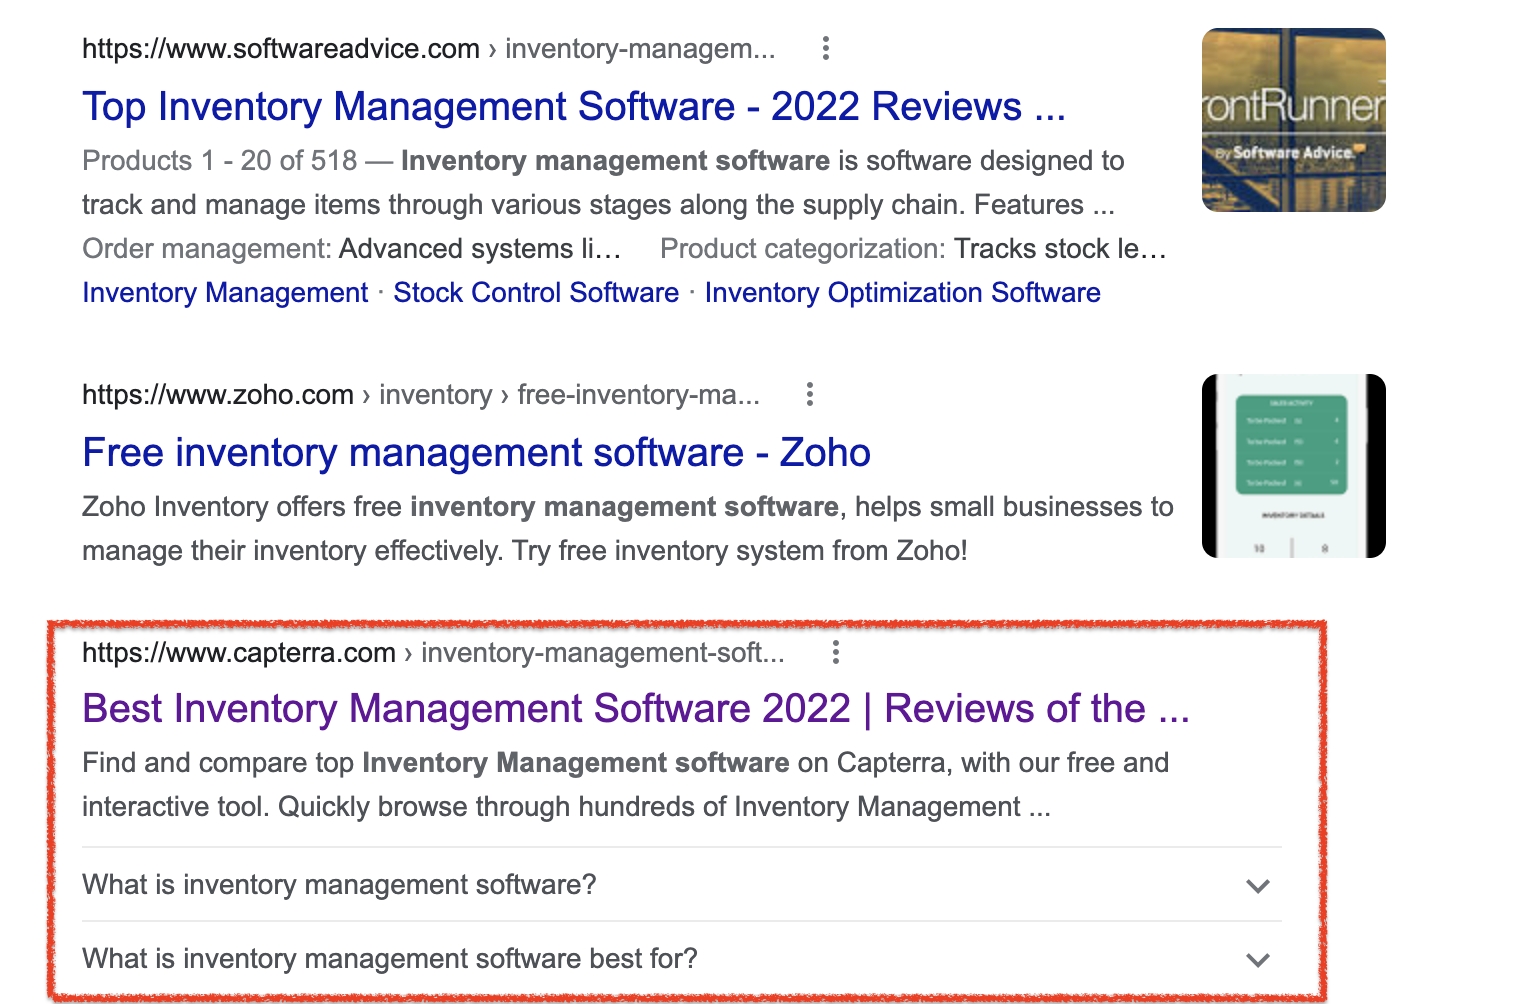 Google results page of best inventory management software options in 2022